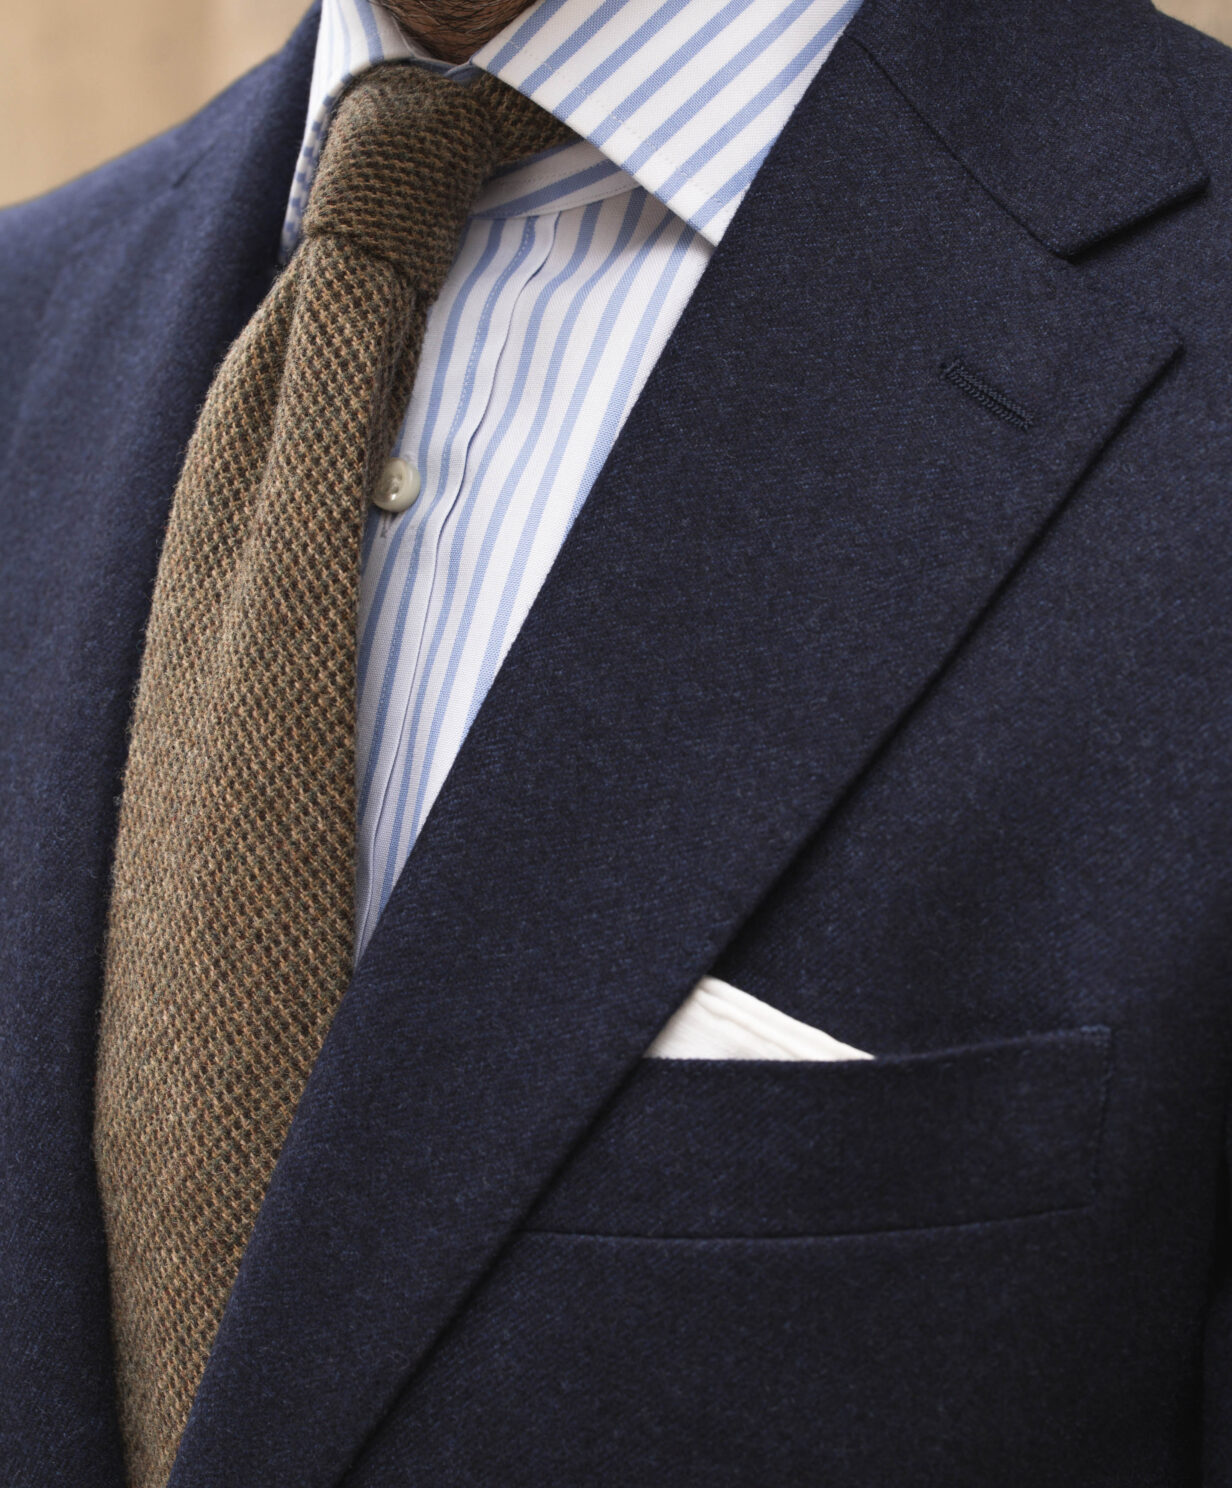 Navy Flannel Suit With Striped Shirt and Tan Tie | He Spoke Style